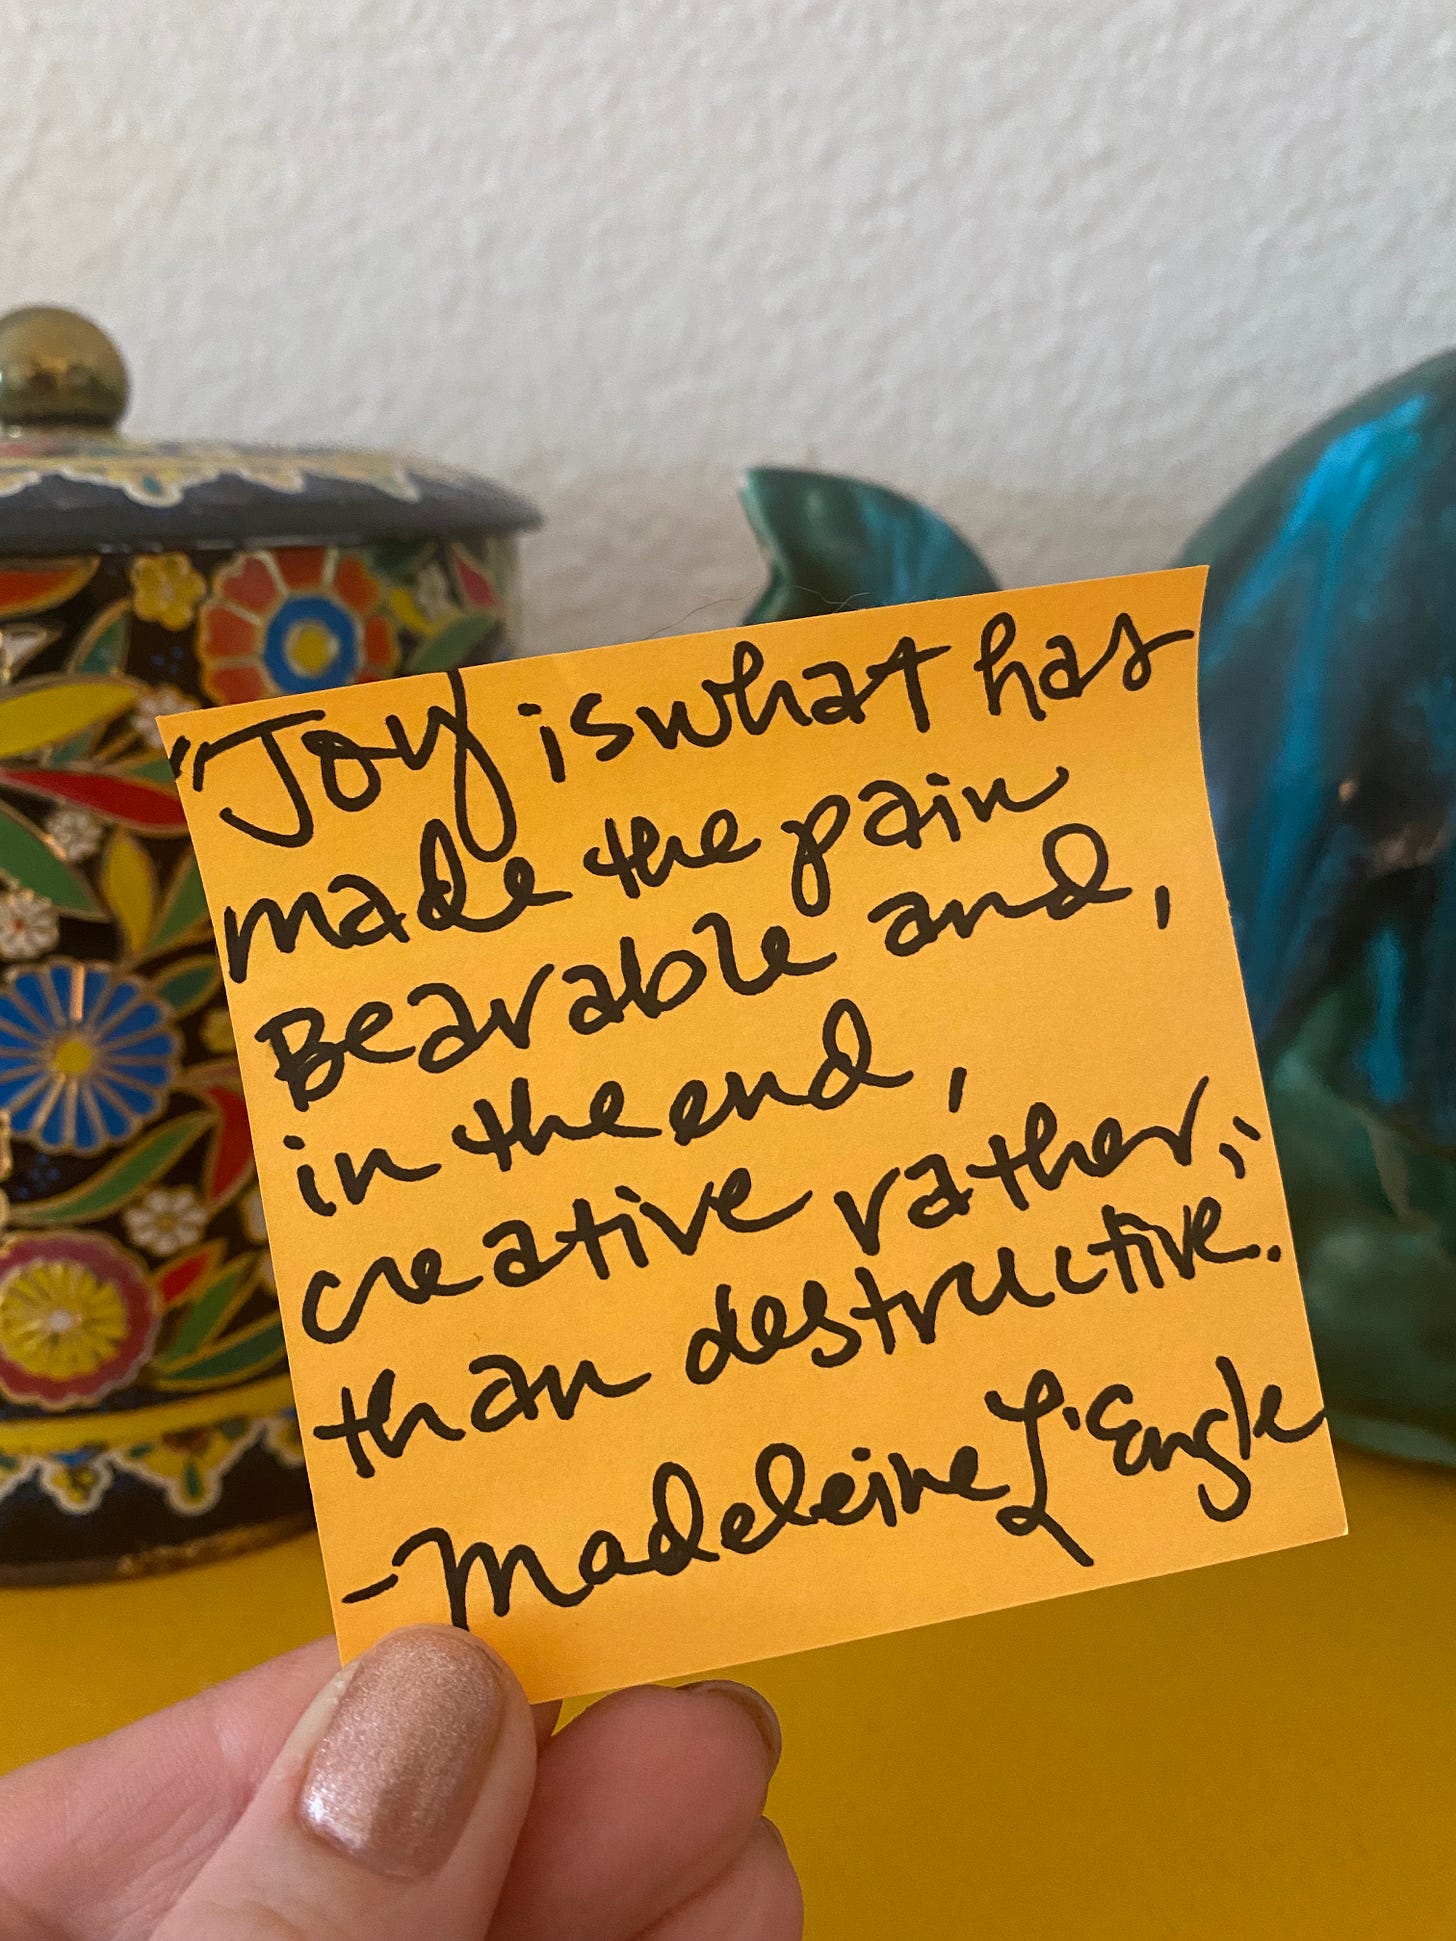 EJW holding today's inspiration in front of a colorful tin and teal teapot on an orange post-it note